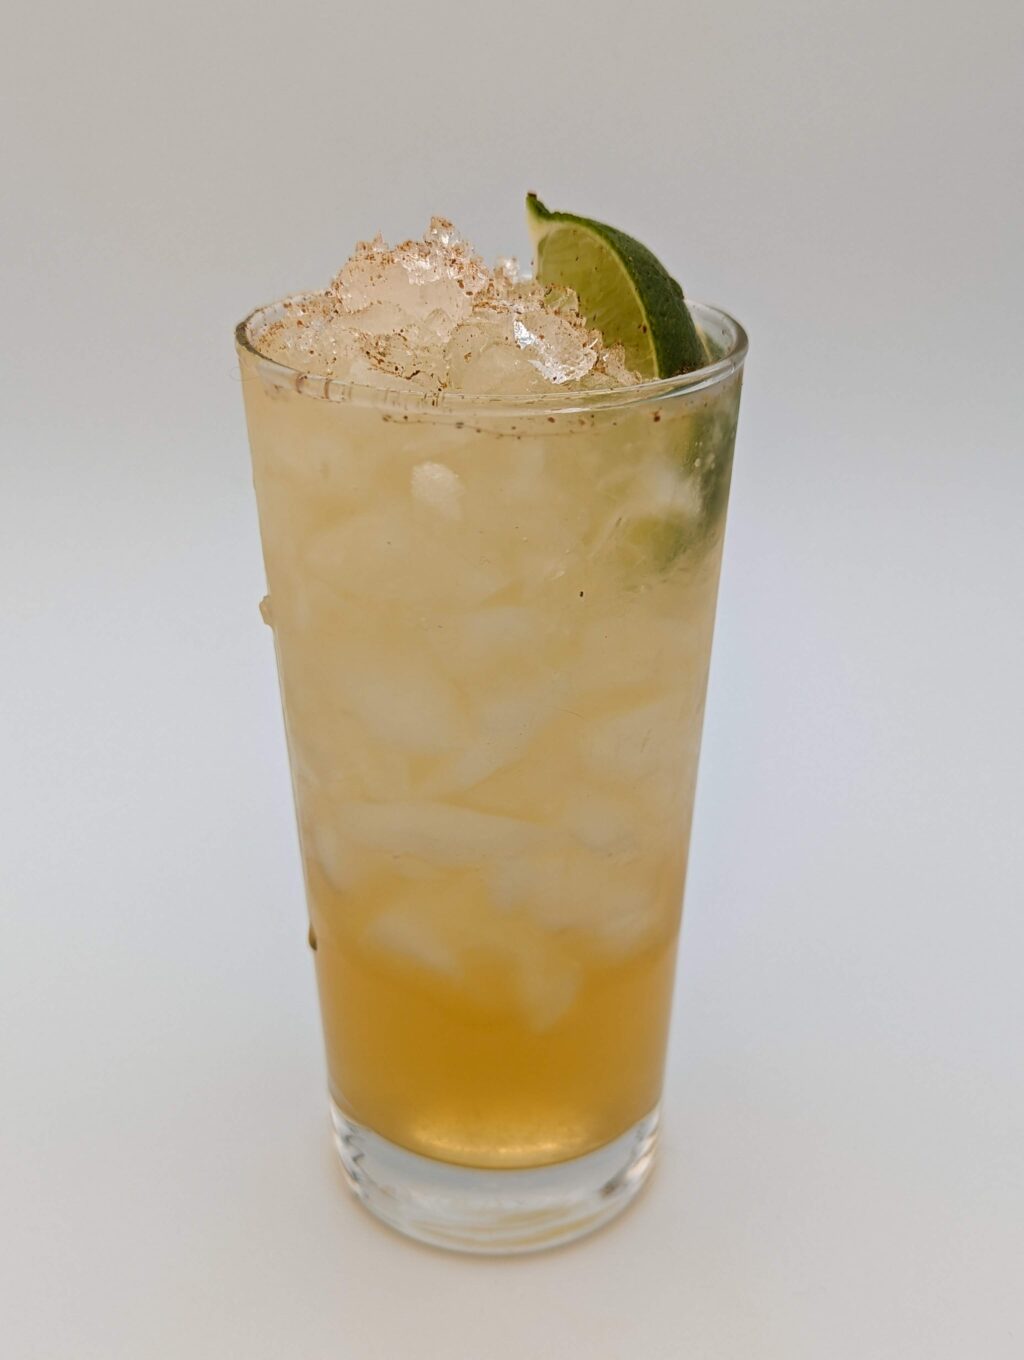 gold liquid in a tall glass filled with crushed ice with a lime wedge garnish